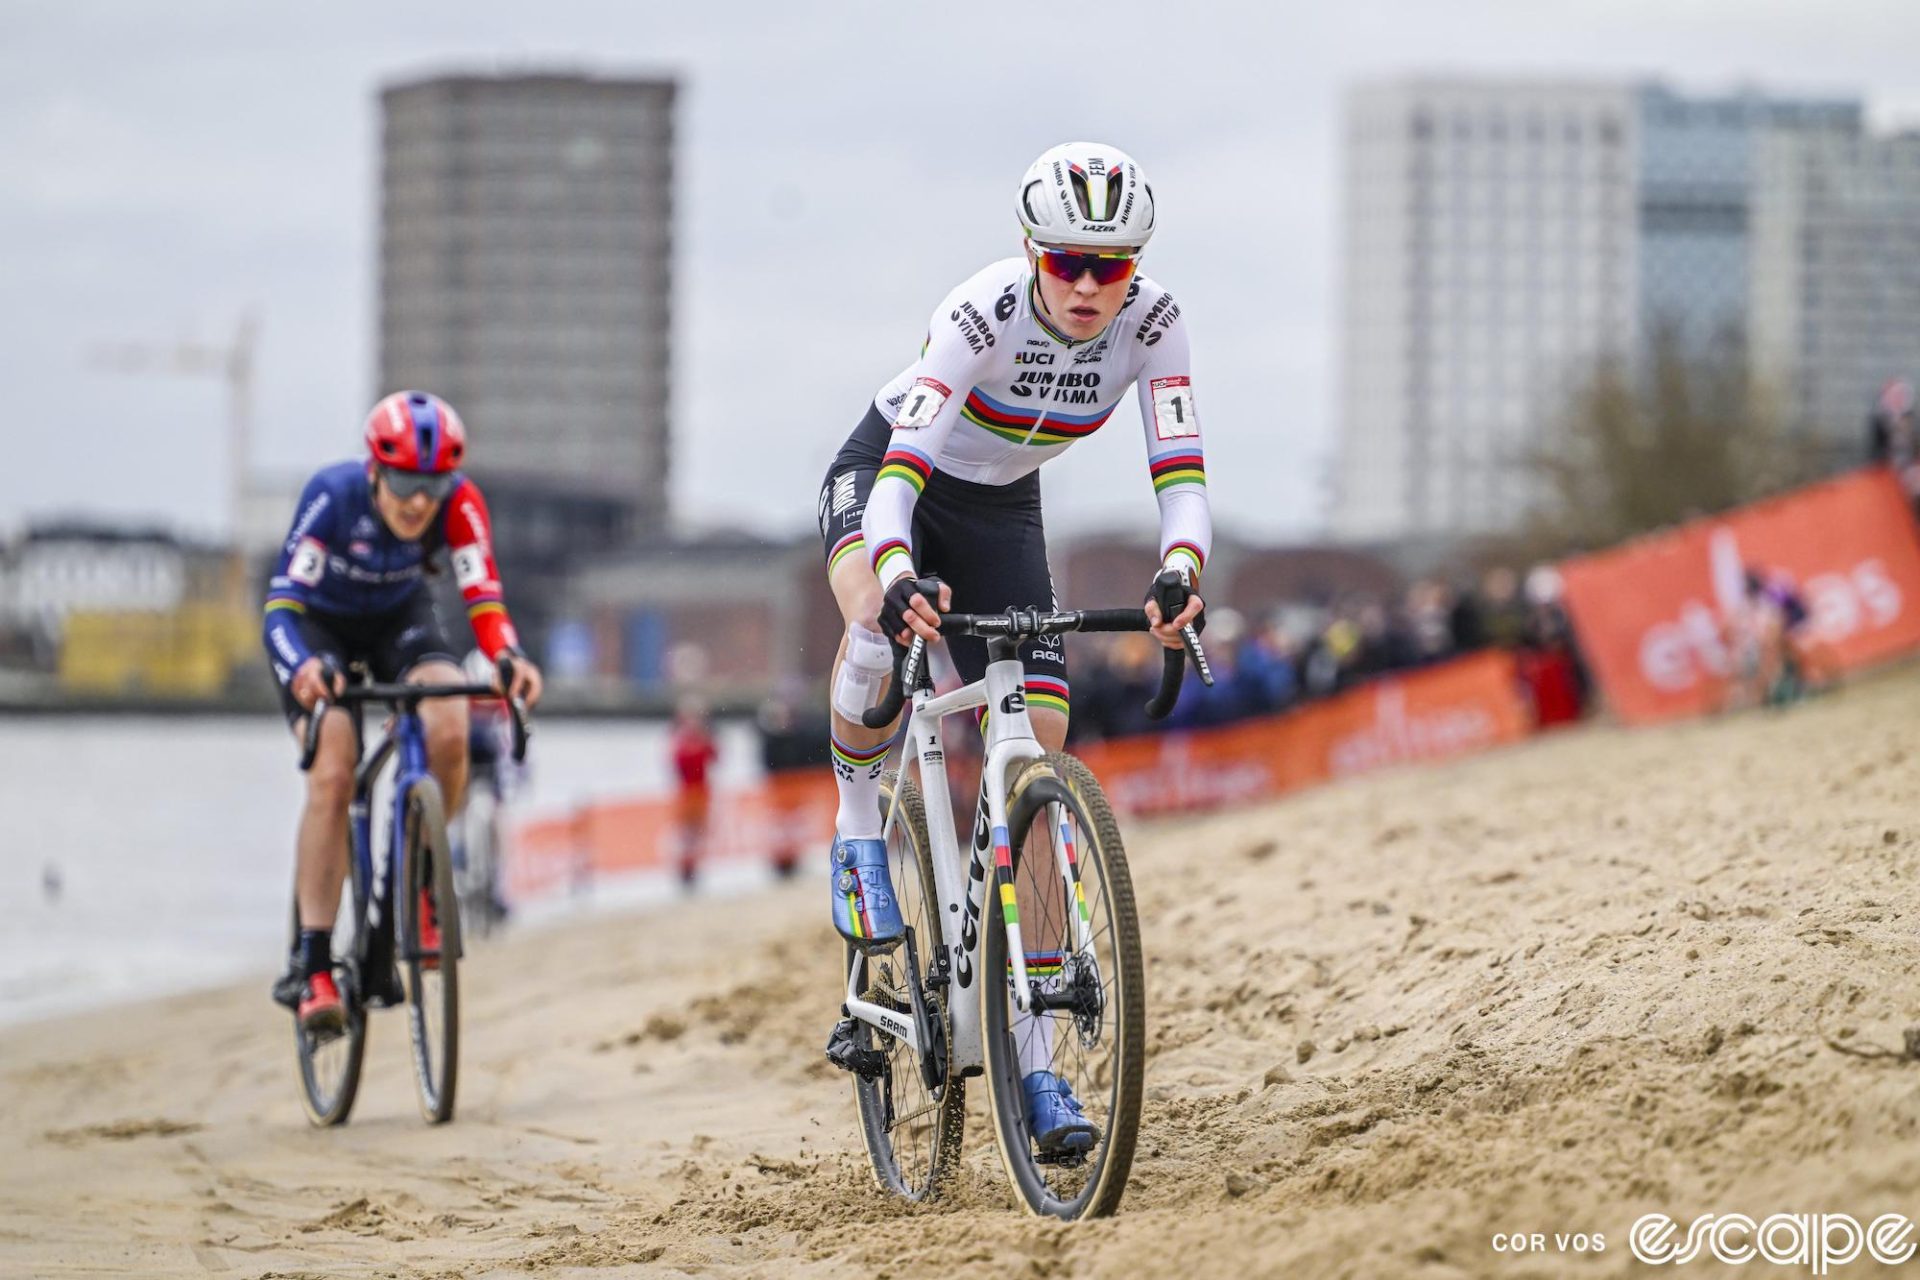 Fem van Empel leads Lucinda Brand on the beach in the early laps of the Antwerp World Cup.